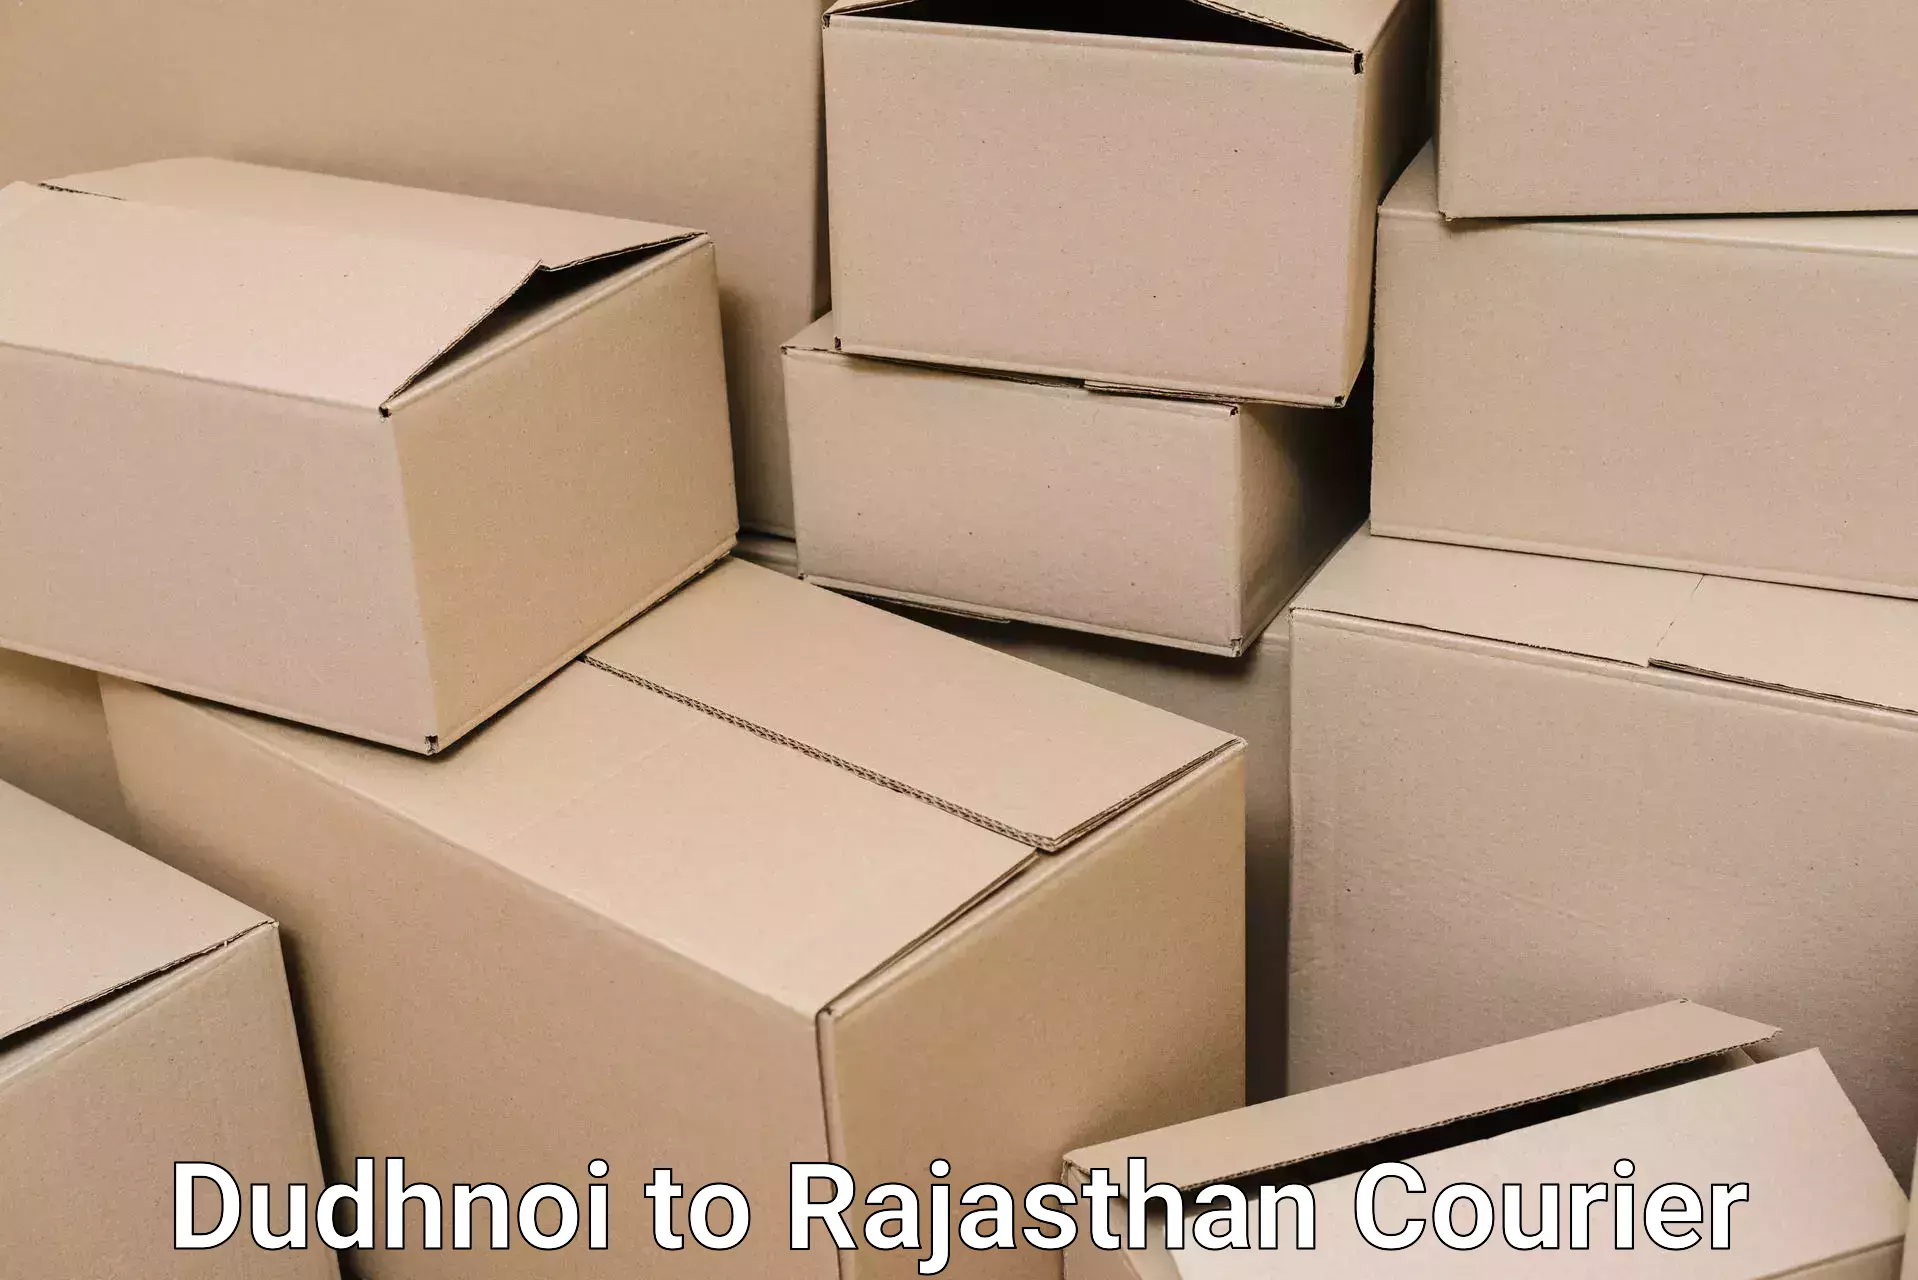 Furniture transport company Dudhnoi to Bharatpur